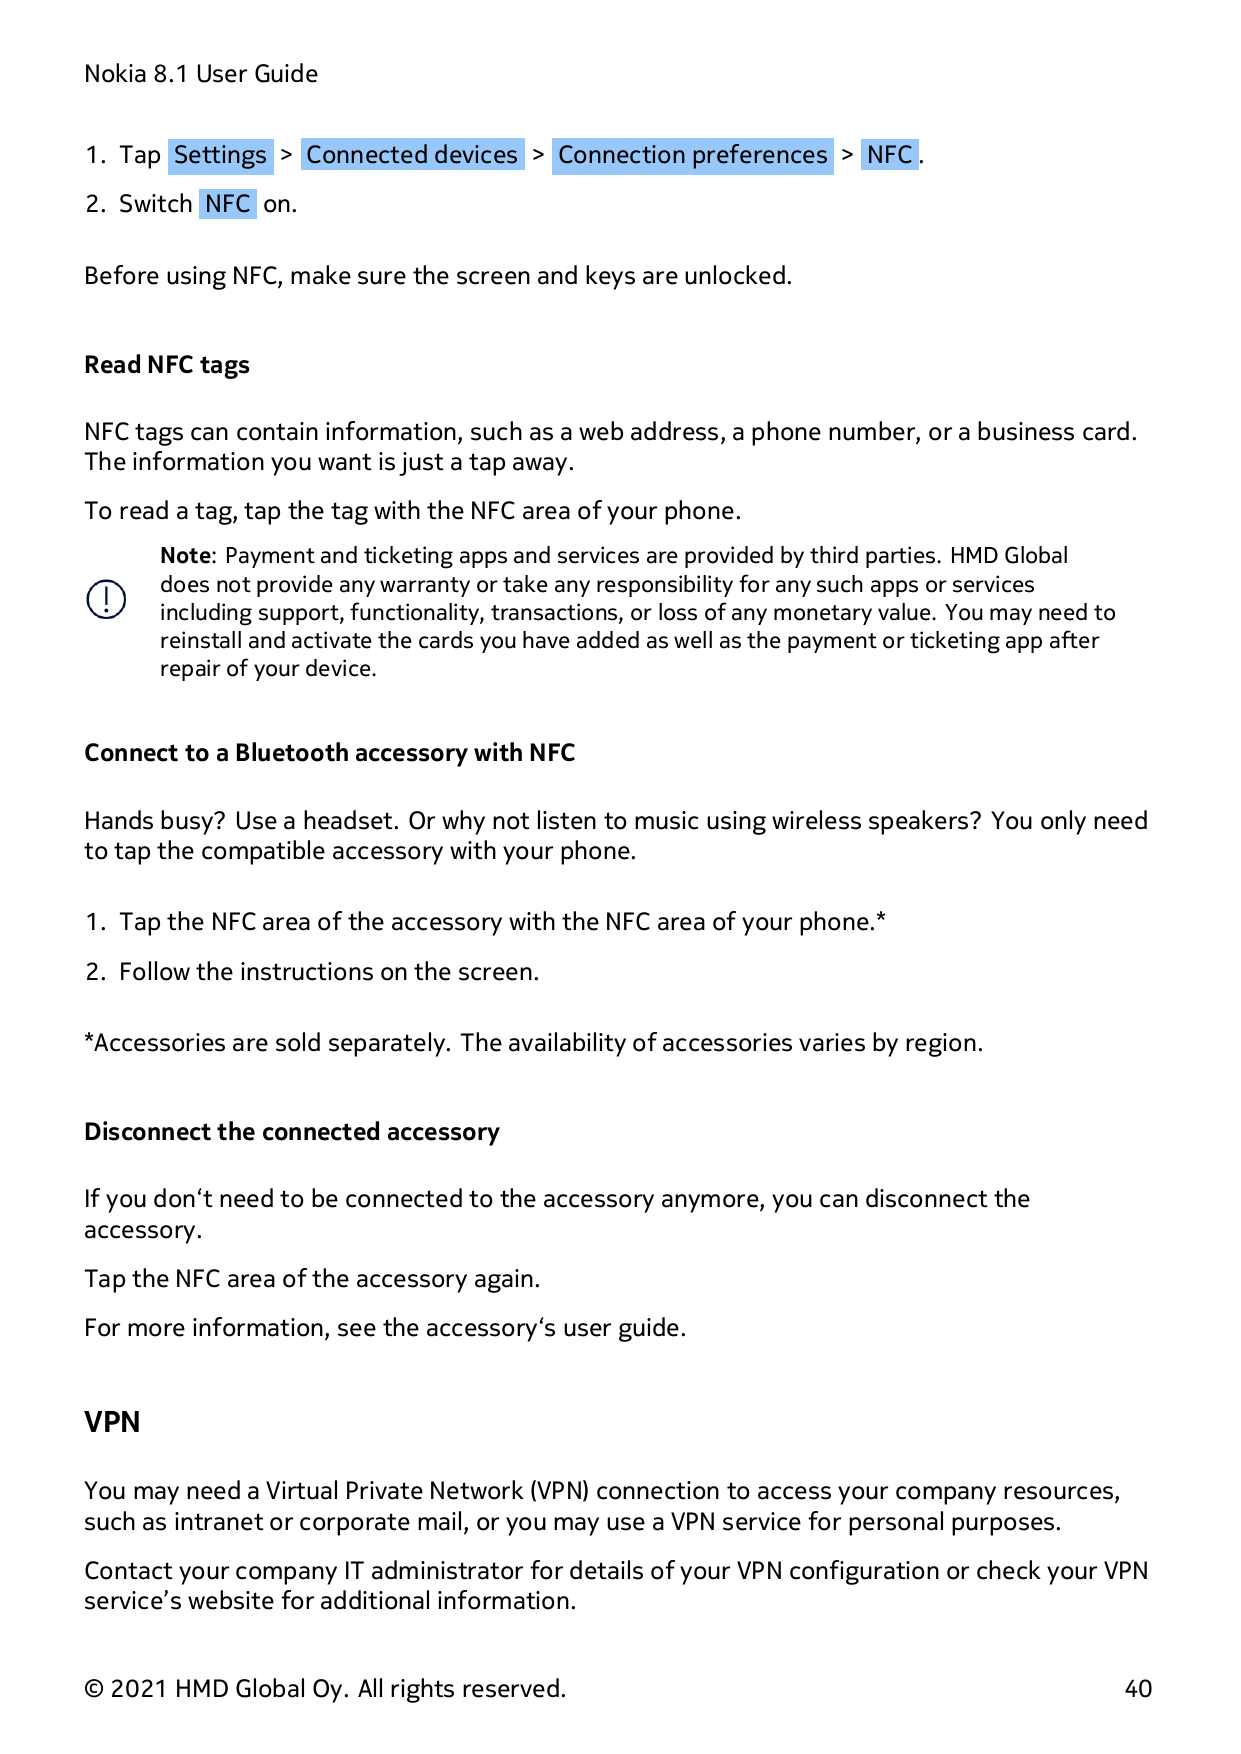 Nokia 8.1 User Guide1. Tap Settings > Connected devices > Connection preferences > NFC .2. Switch NFC on.Before using NFC, make 